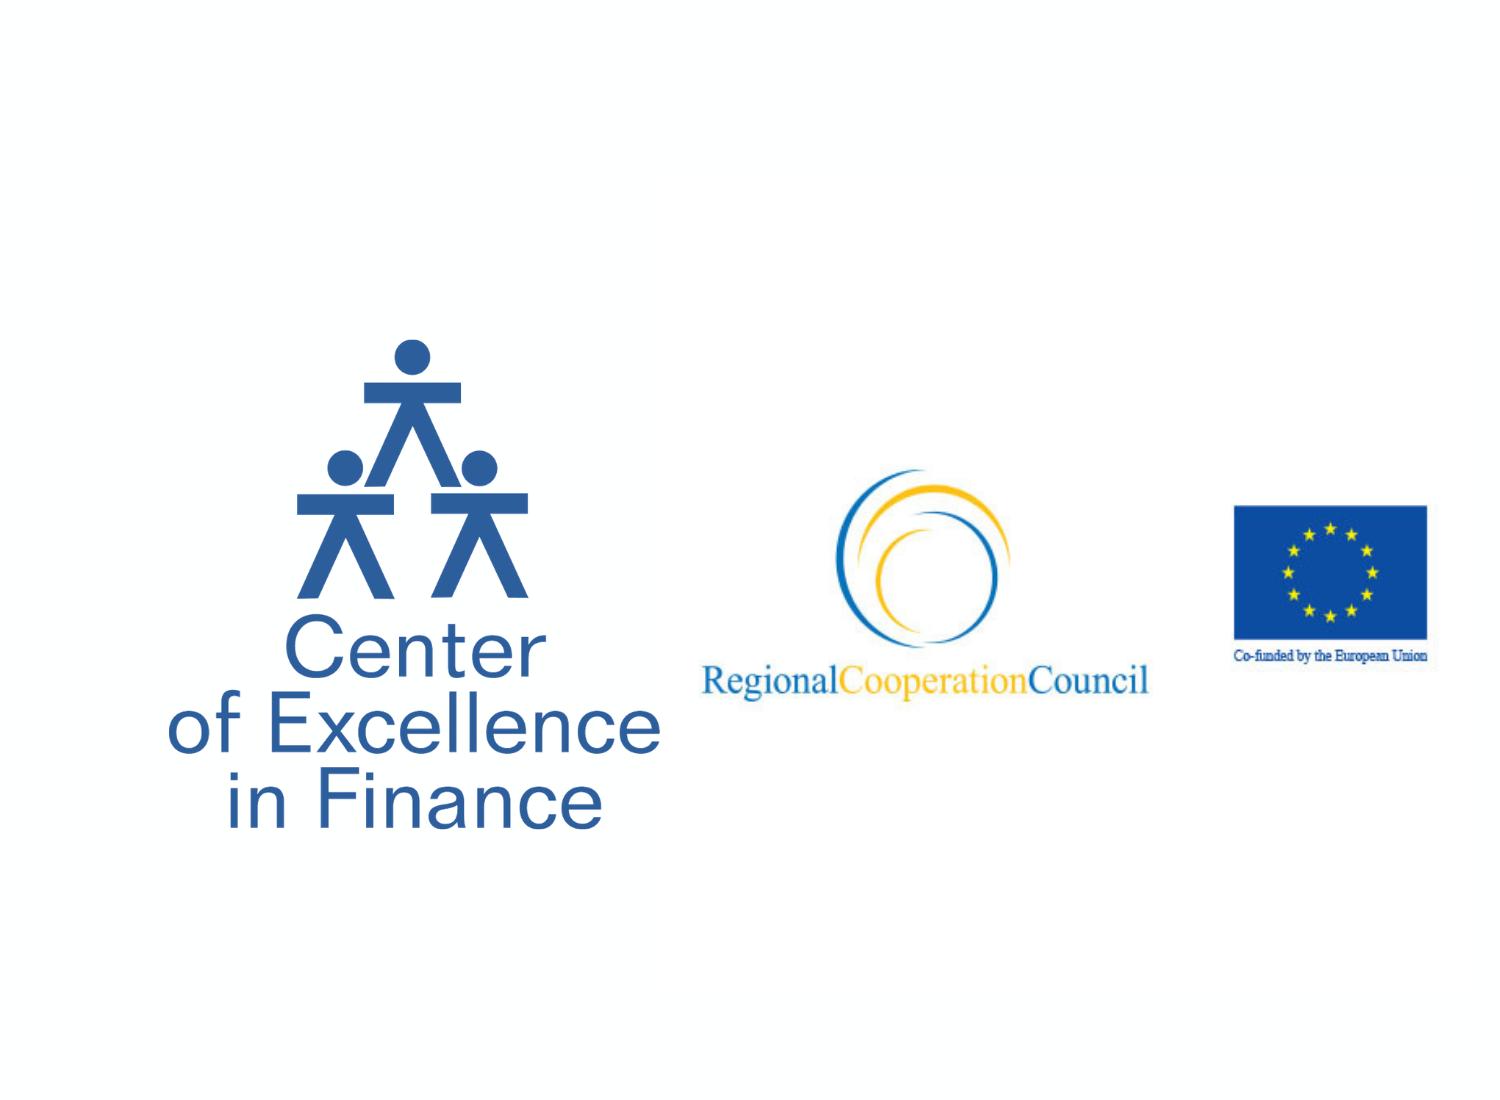 RCC and Center of Excellence in Finance signed MoU